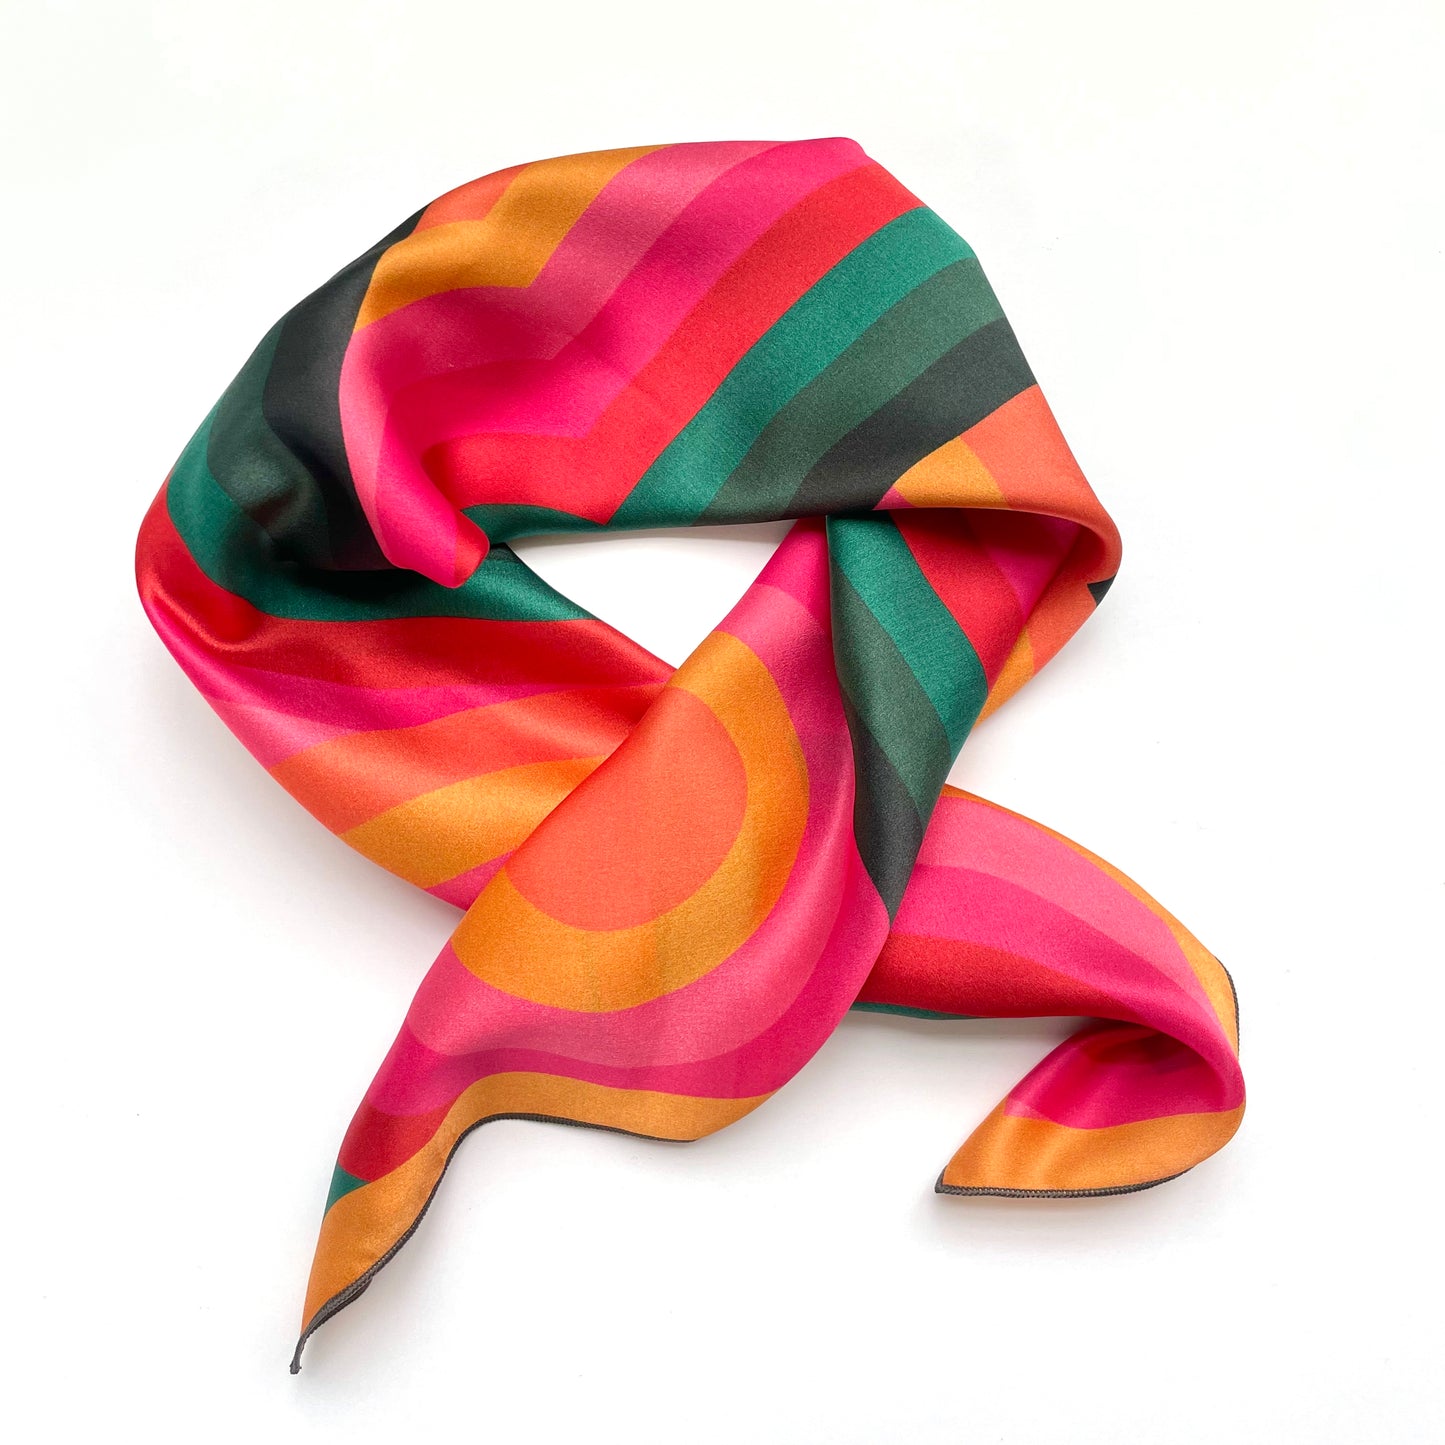 The Lolly is a luxury silk scarf that adds punch to fall and winter wardrobe with its rich colors, this square silk scarf  is great worn as a neckerchief or hair scarf